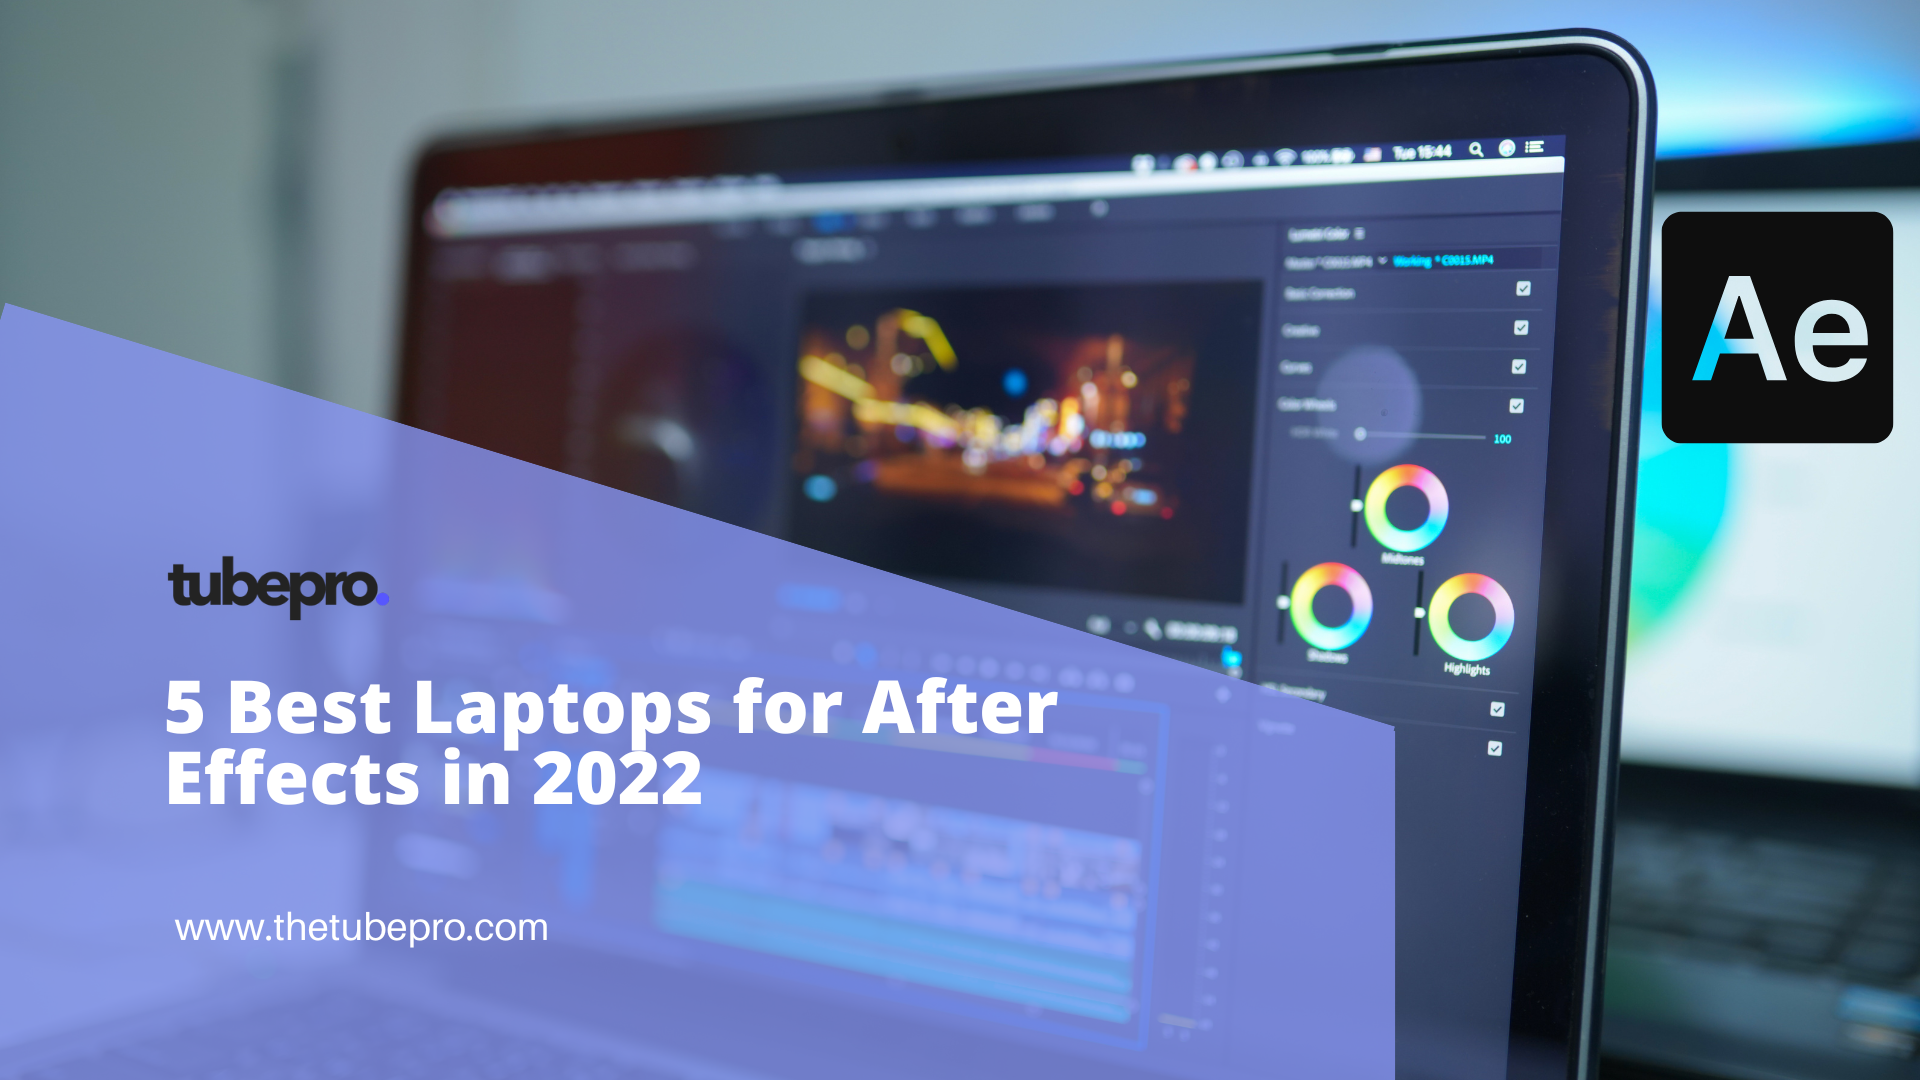 5 Best Laptops for After Effects in 2022